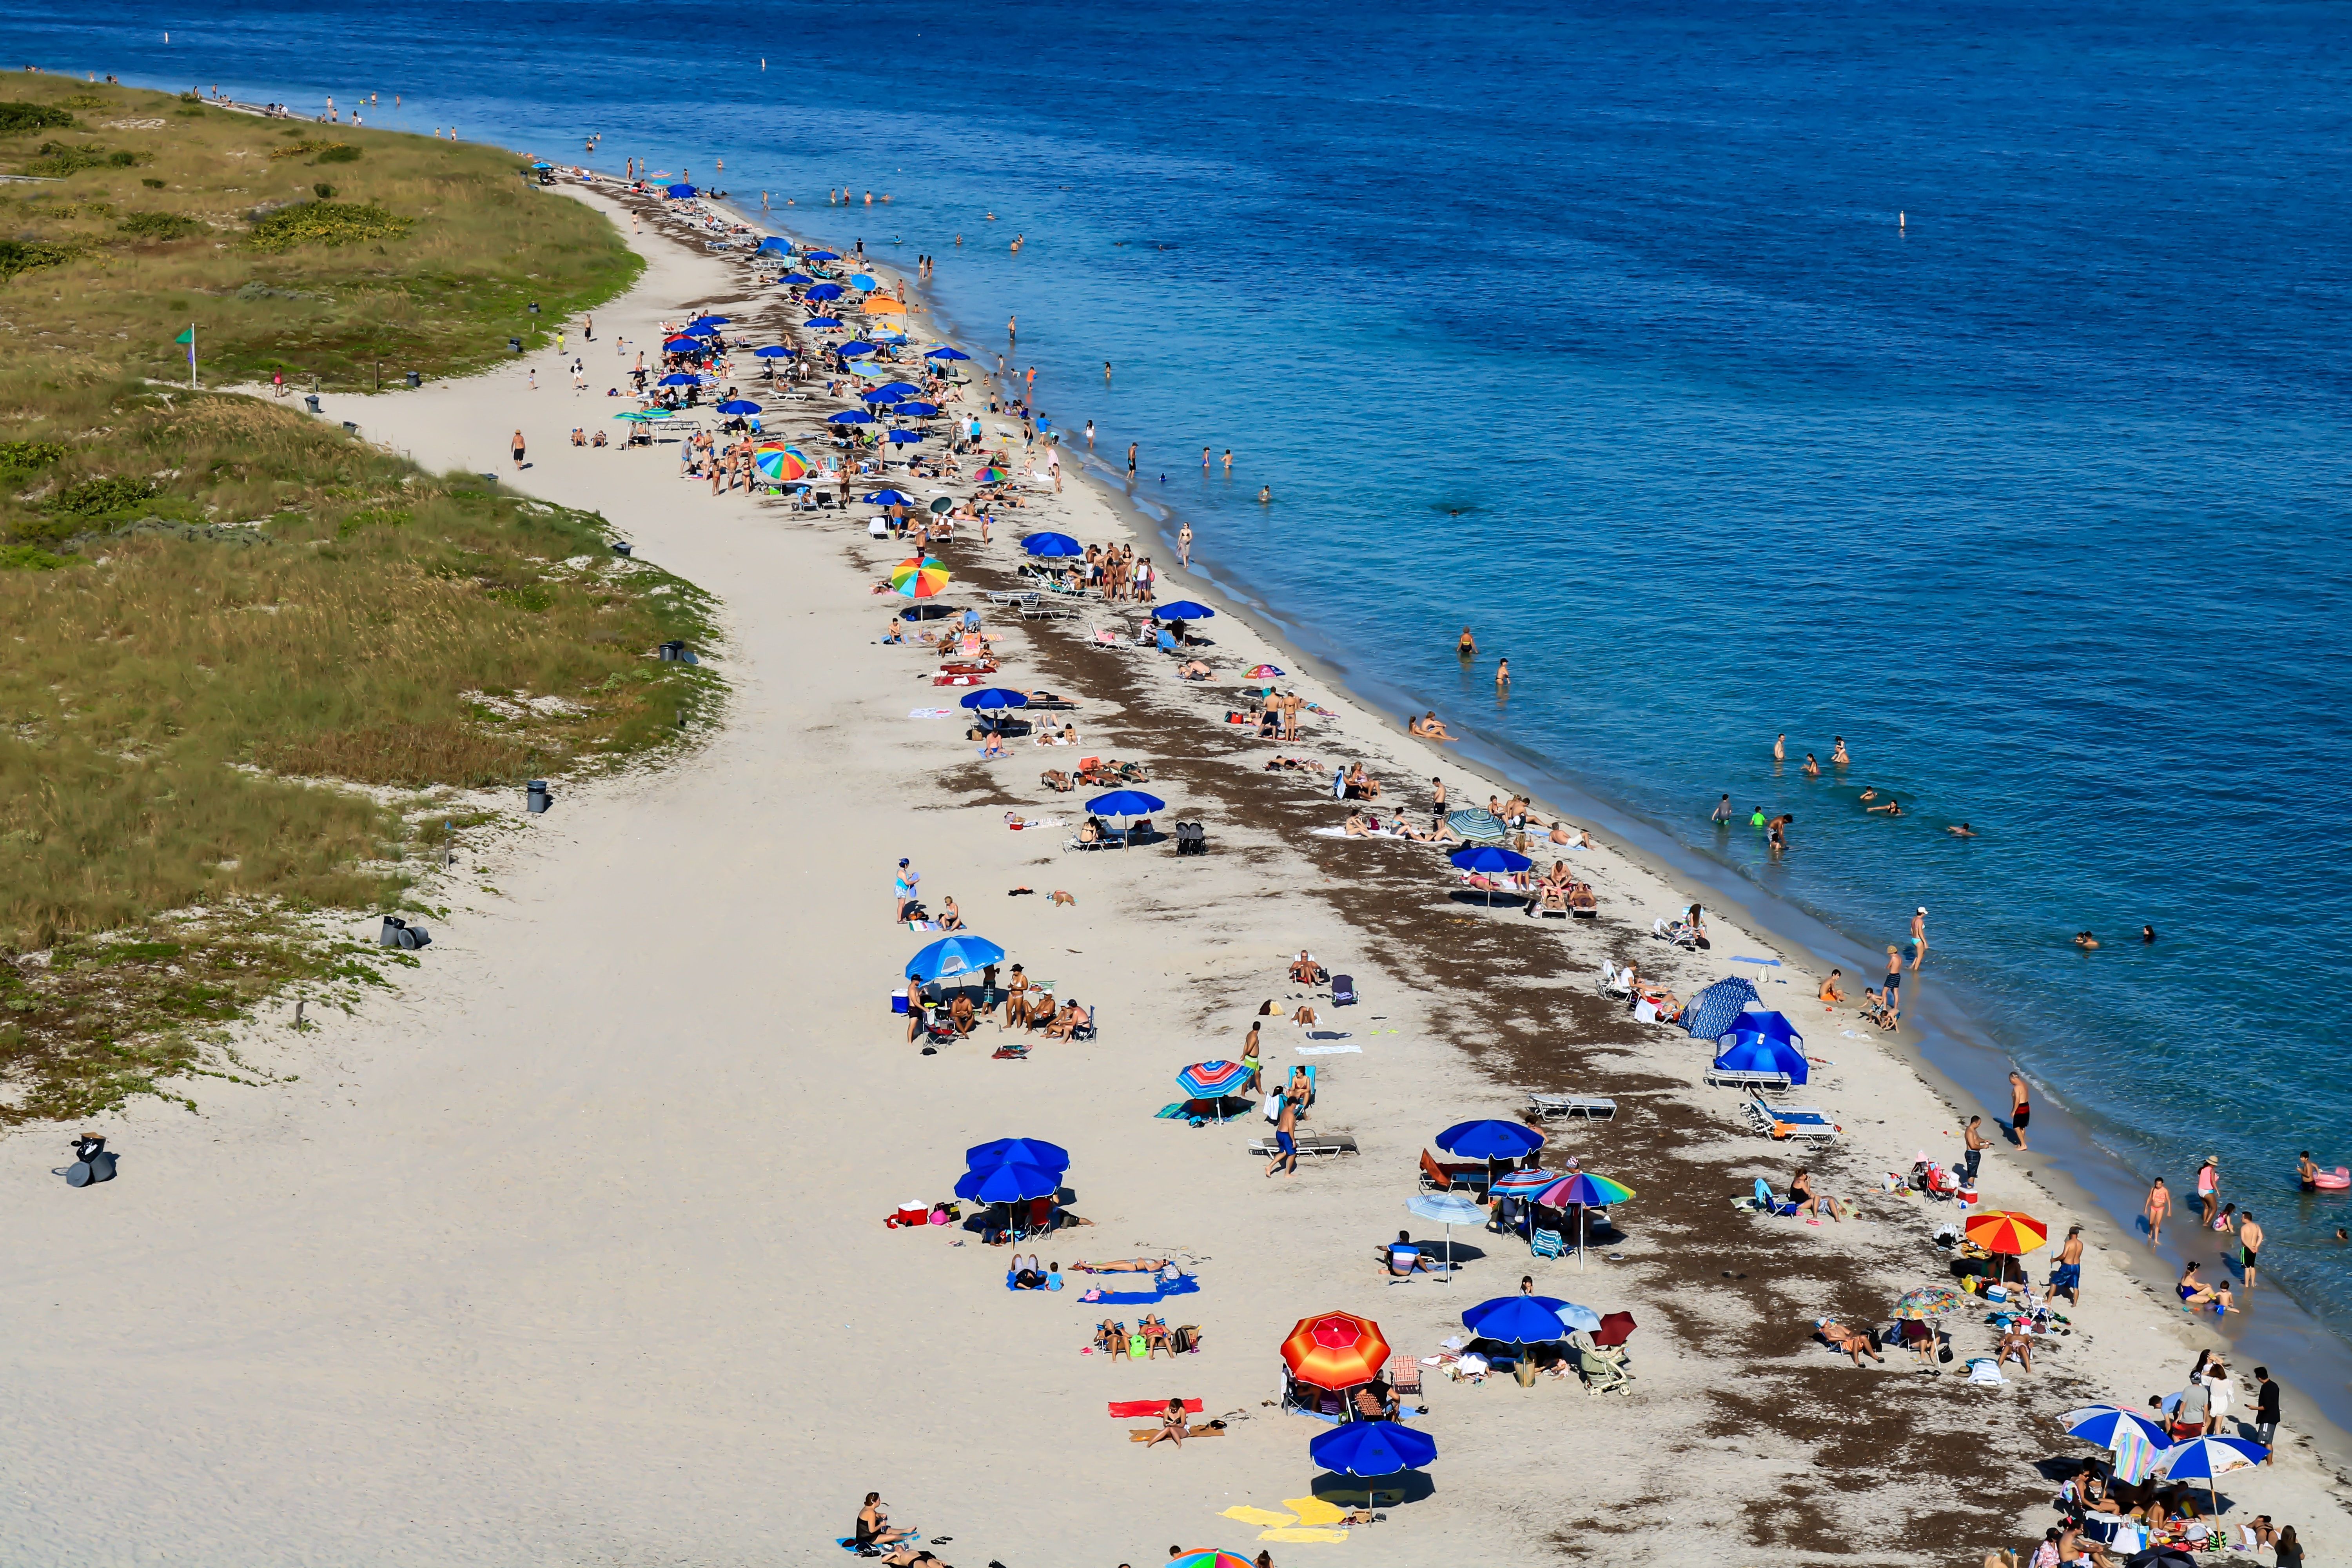 Tourists sunbathing and swimming in a beach in Key Biscayne on a sunny day, Florida